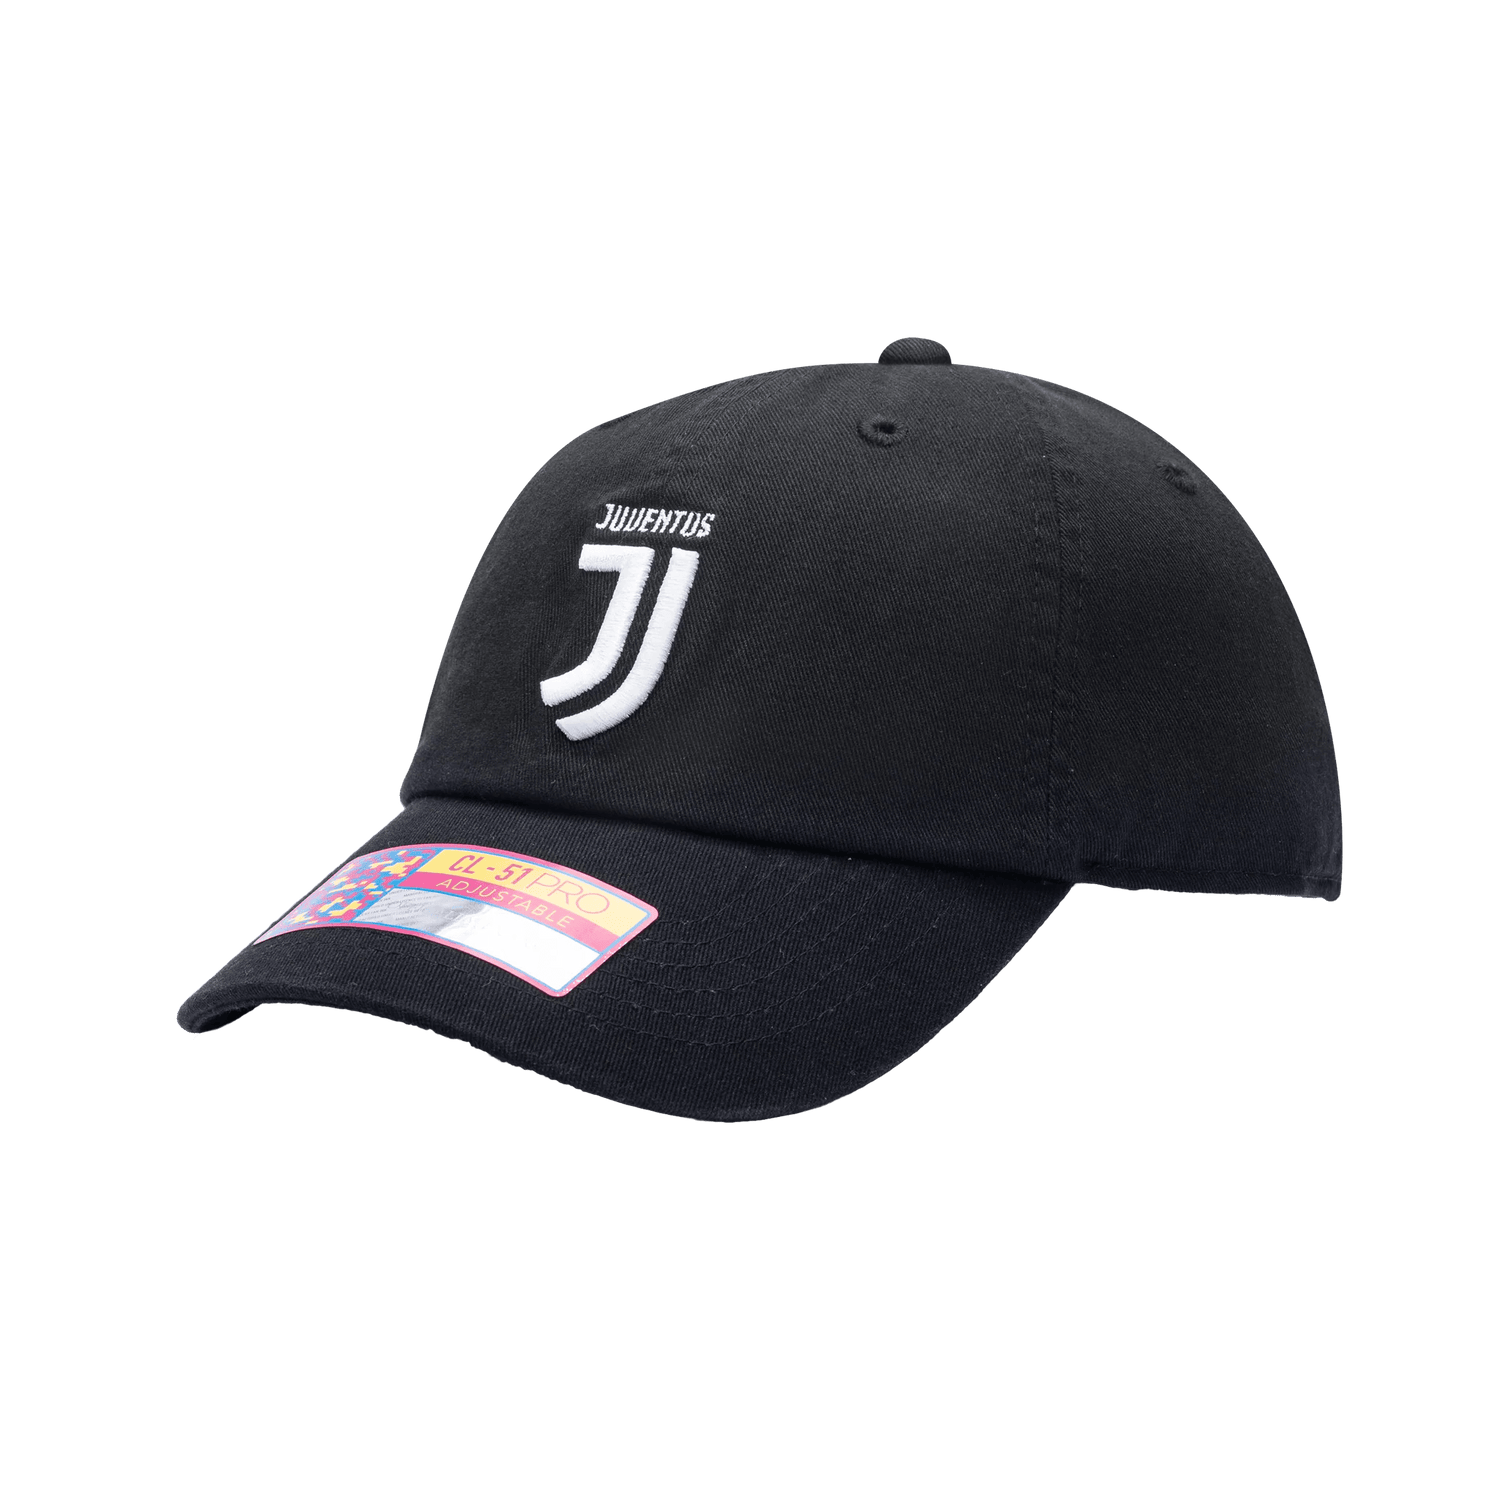 FI Collection Club Juventus Bambo Classic Hat (Lateral - Side 1)